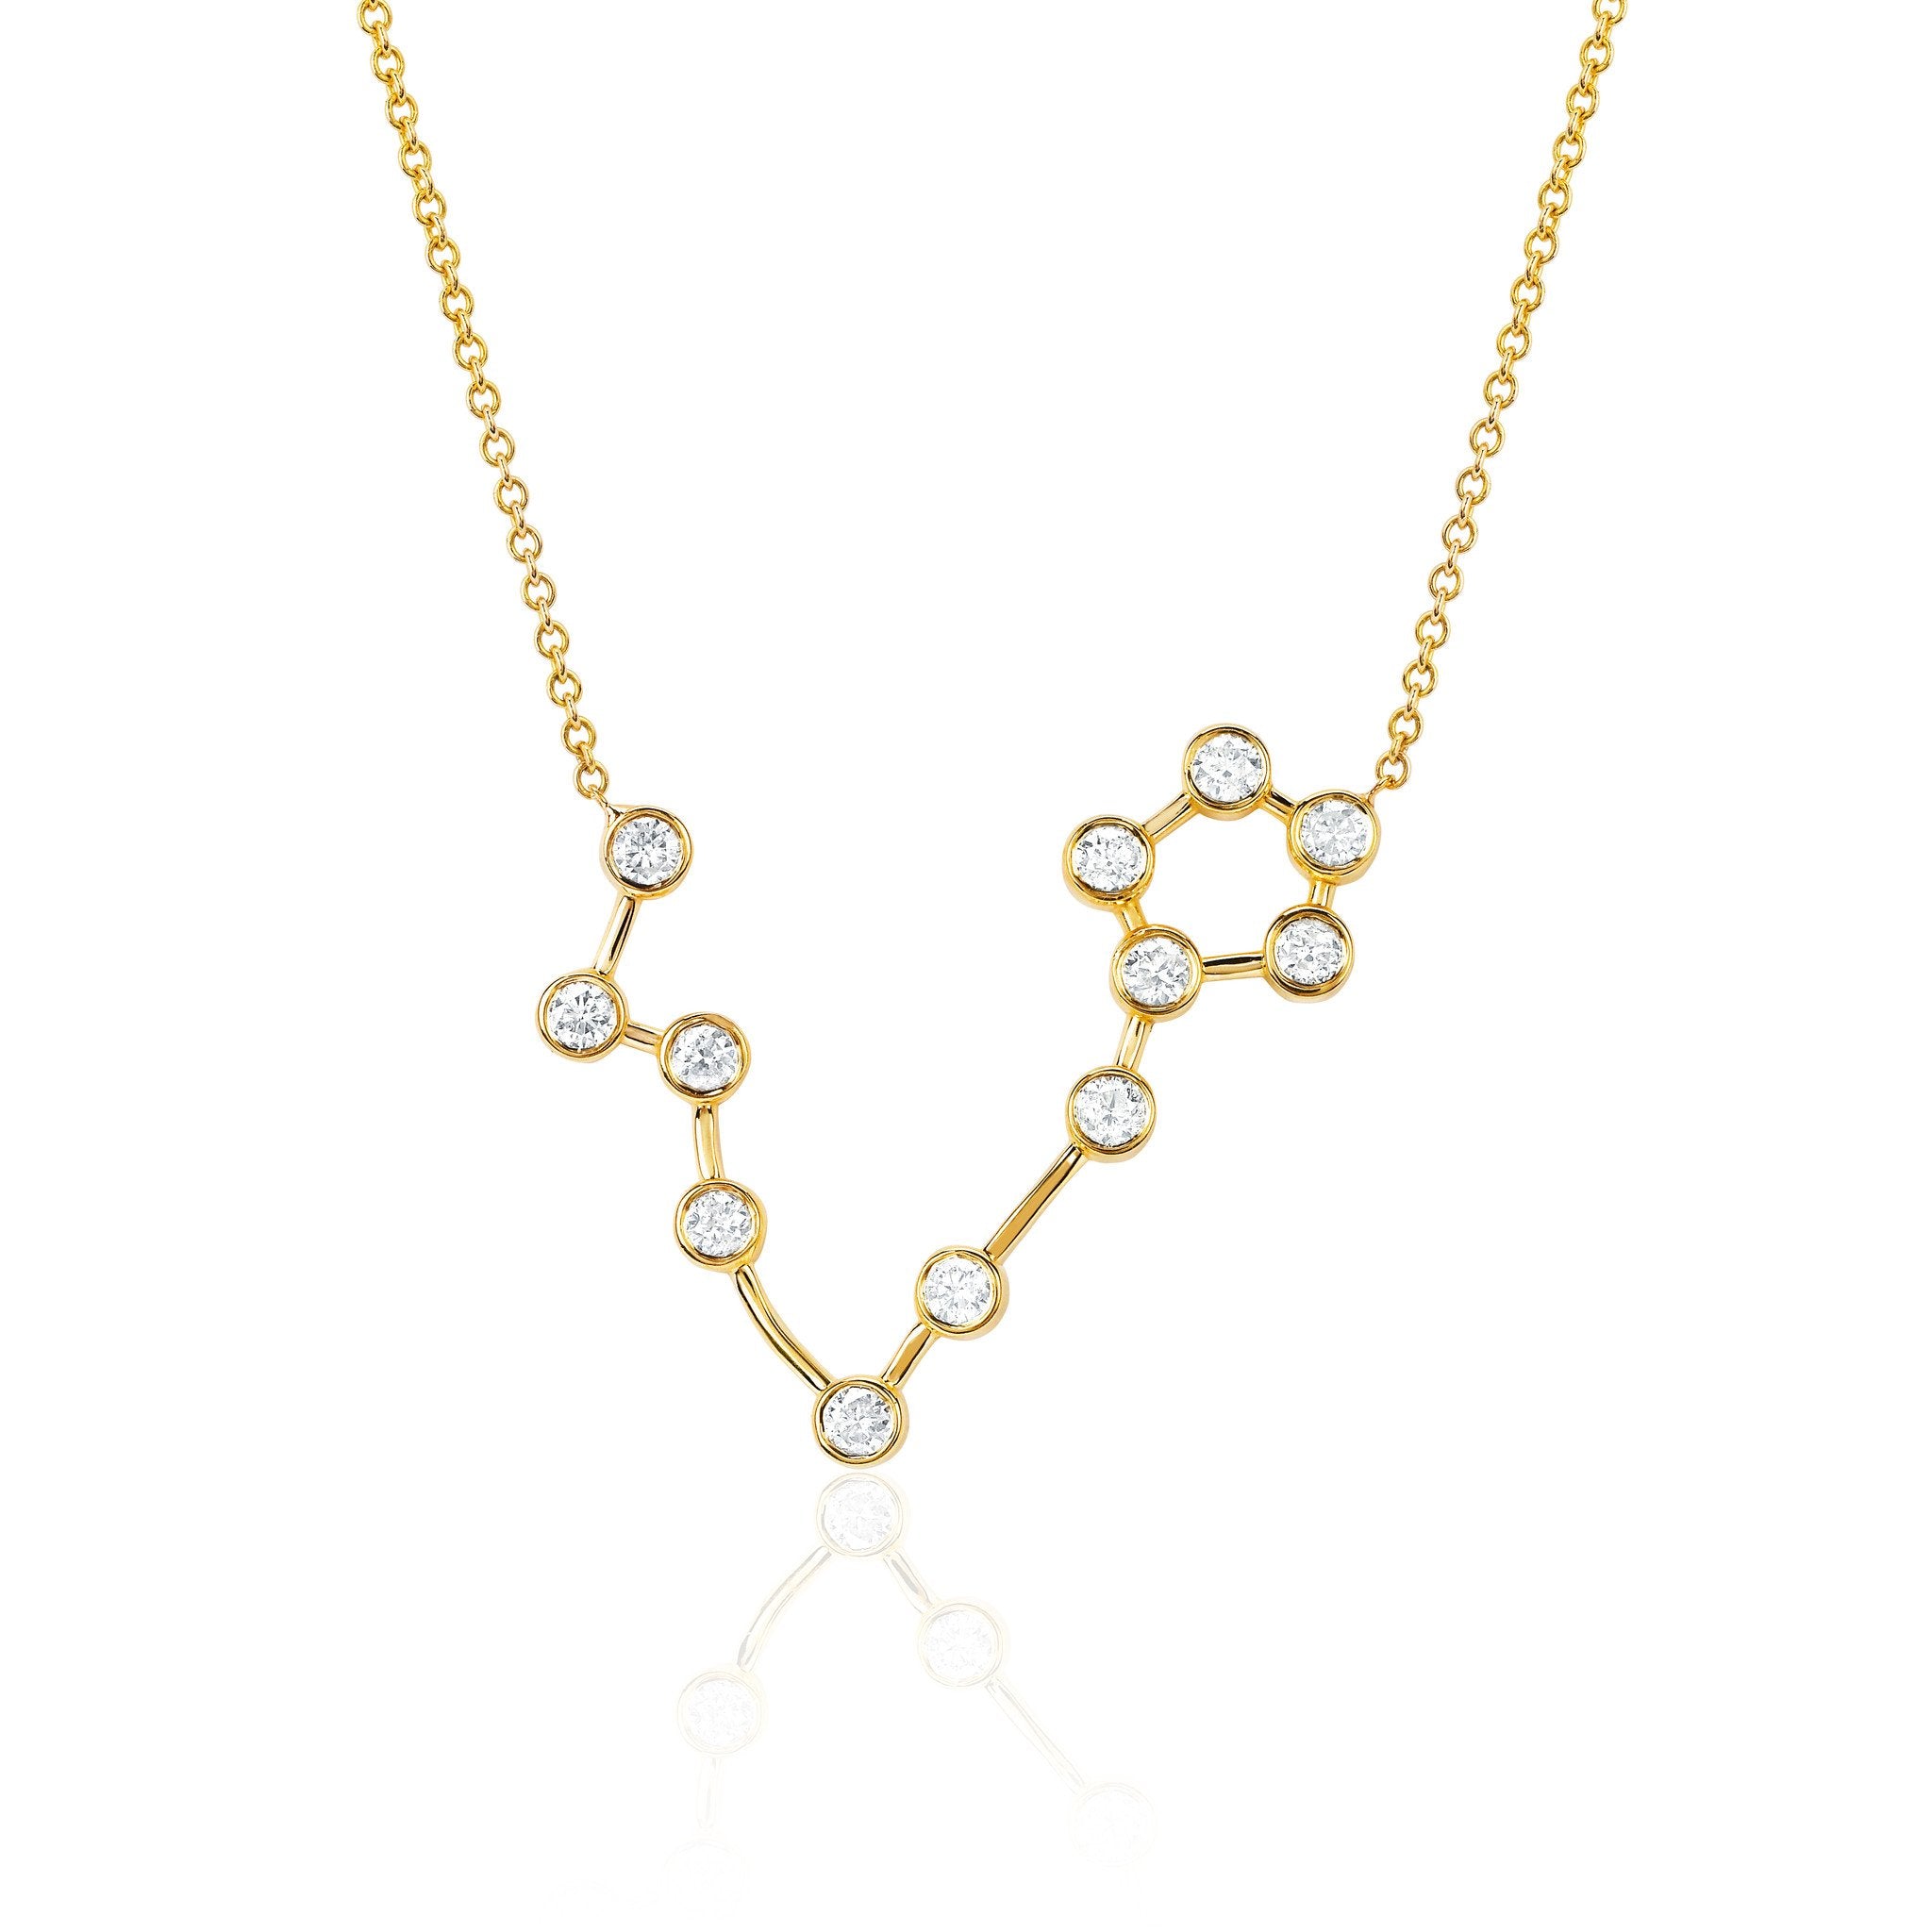 Pisces Constellation Necklace – Logan Hollowell